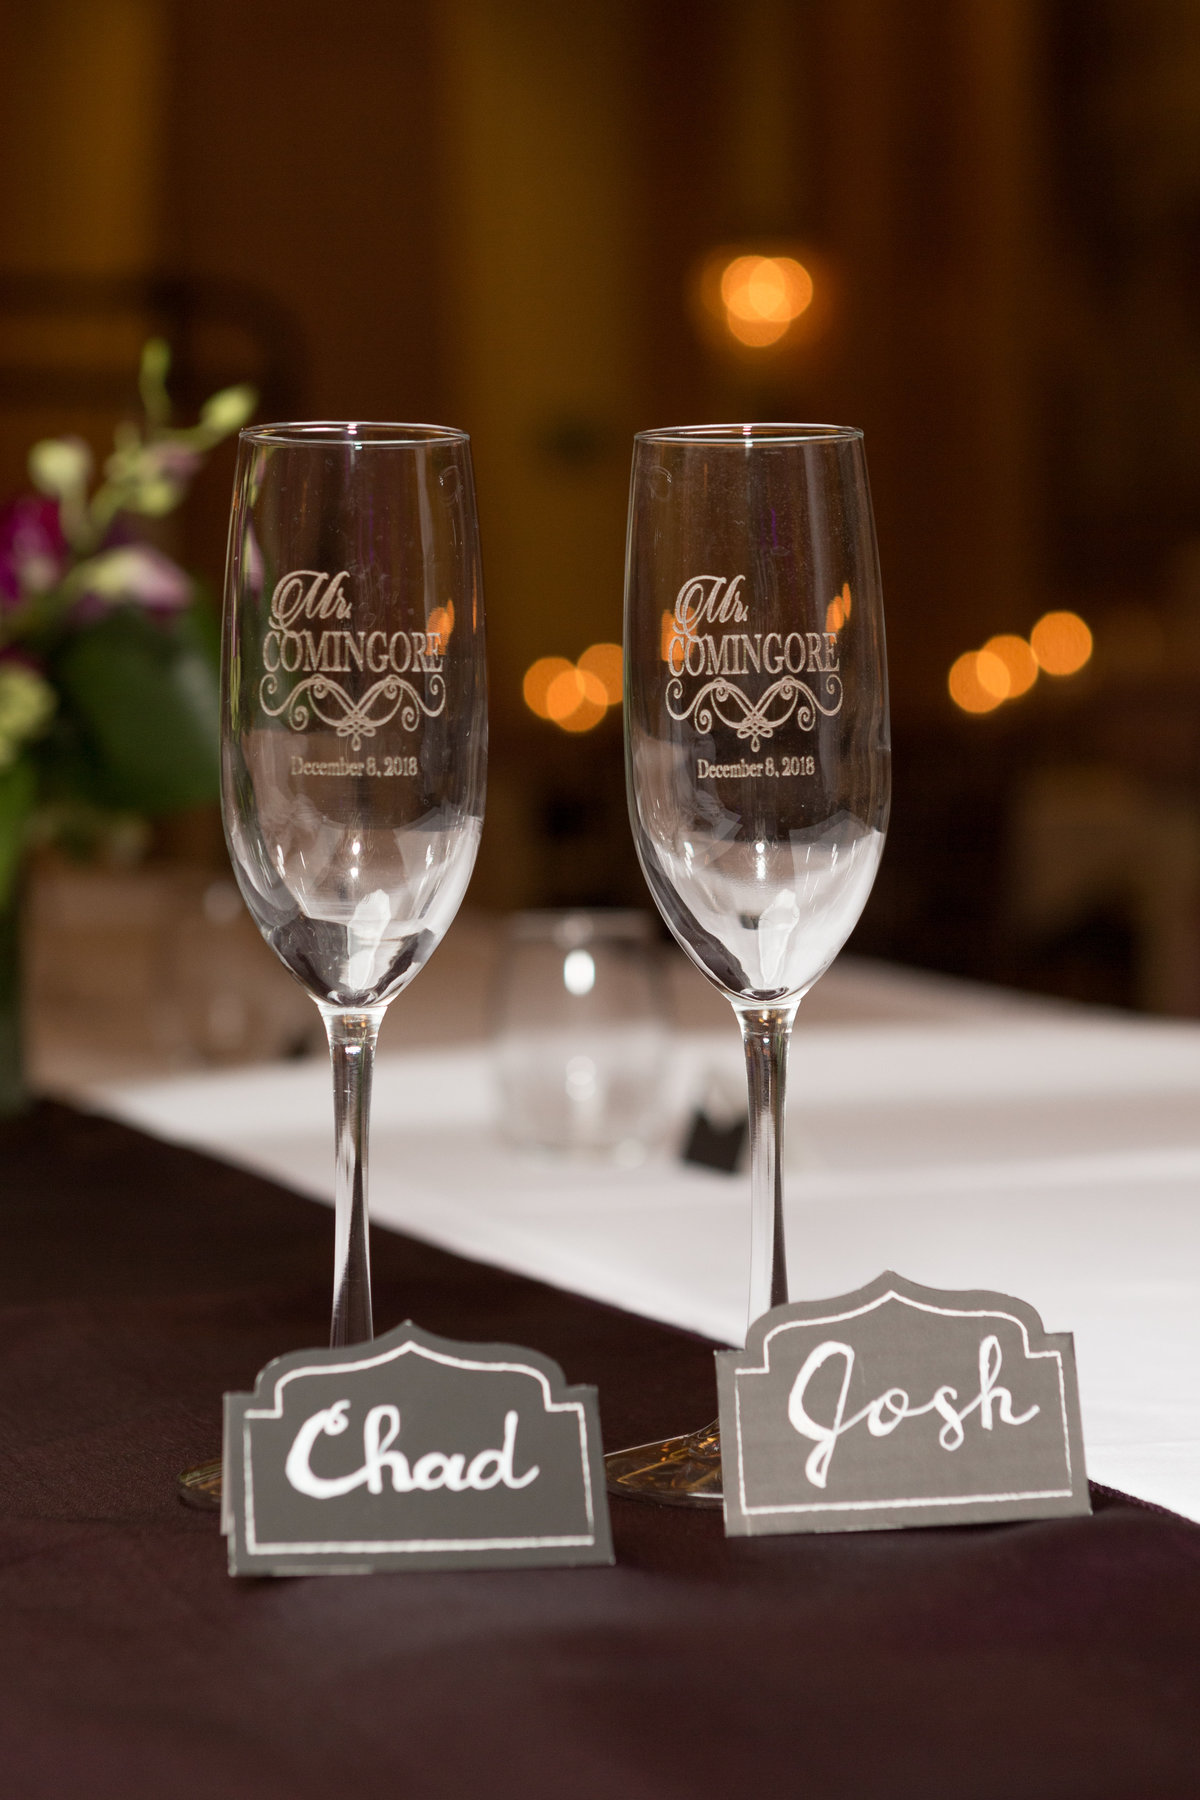 Chad & Josh's toasting glasses at their wedding reception at The Crystal Ballroom of The Battle House Hotel in Mobile, Alabama.